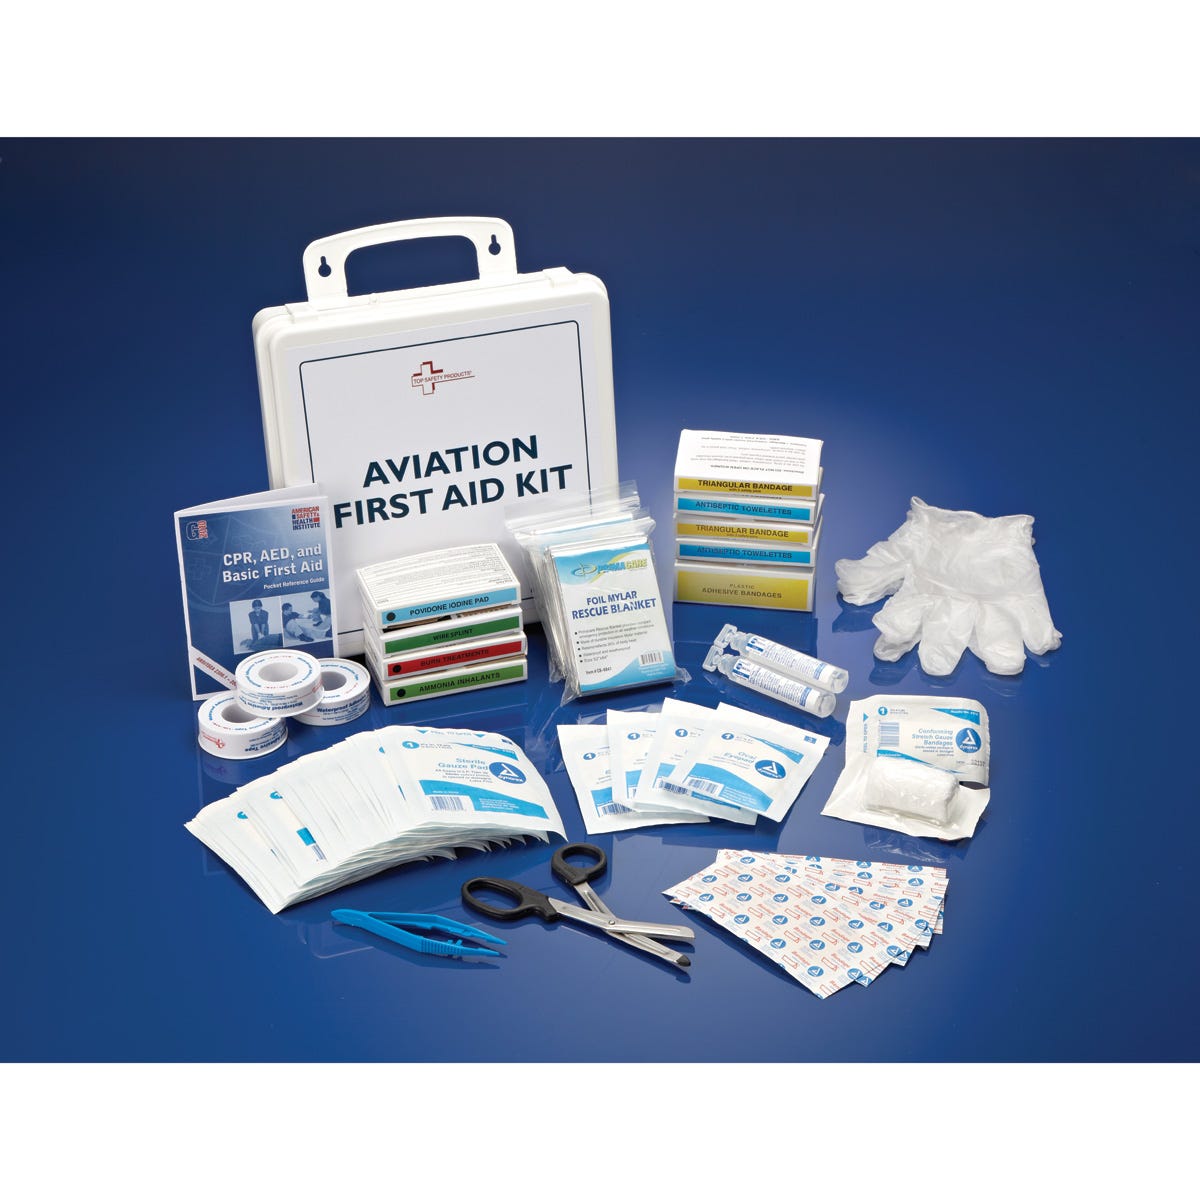 Aviation first aid kit